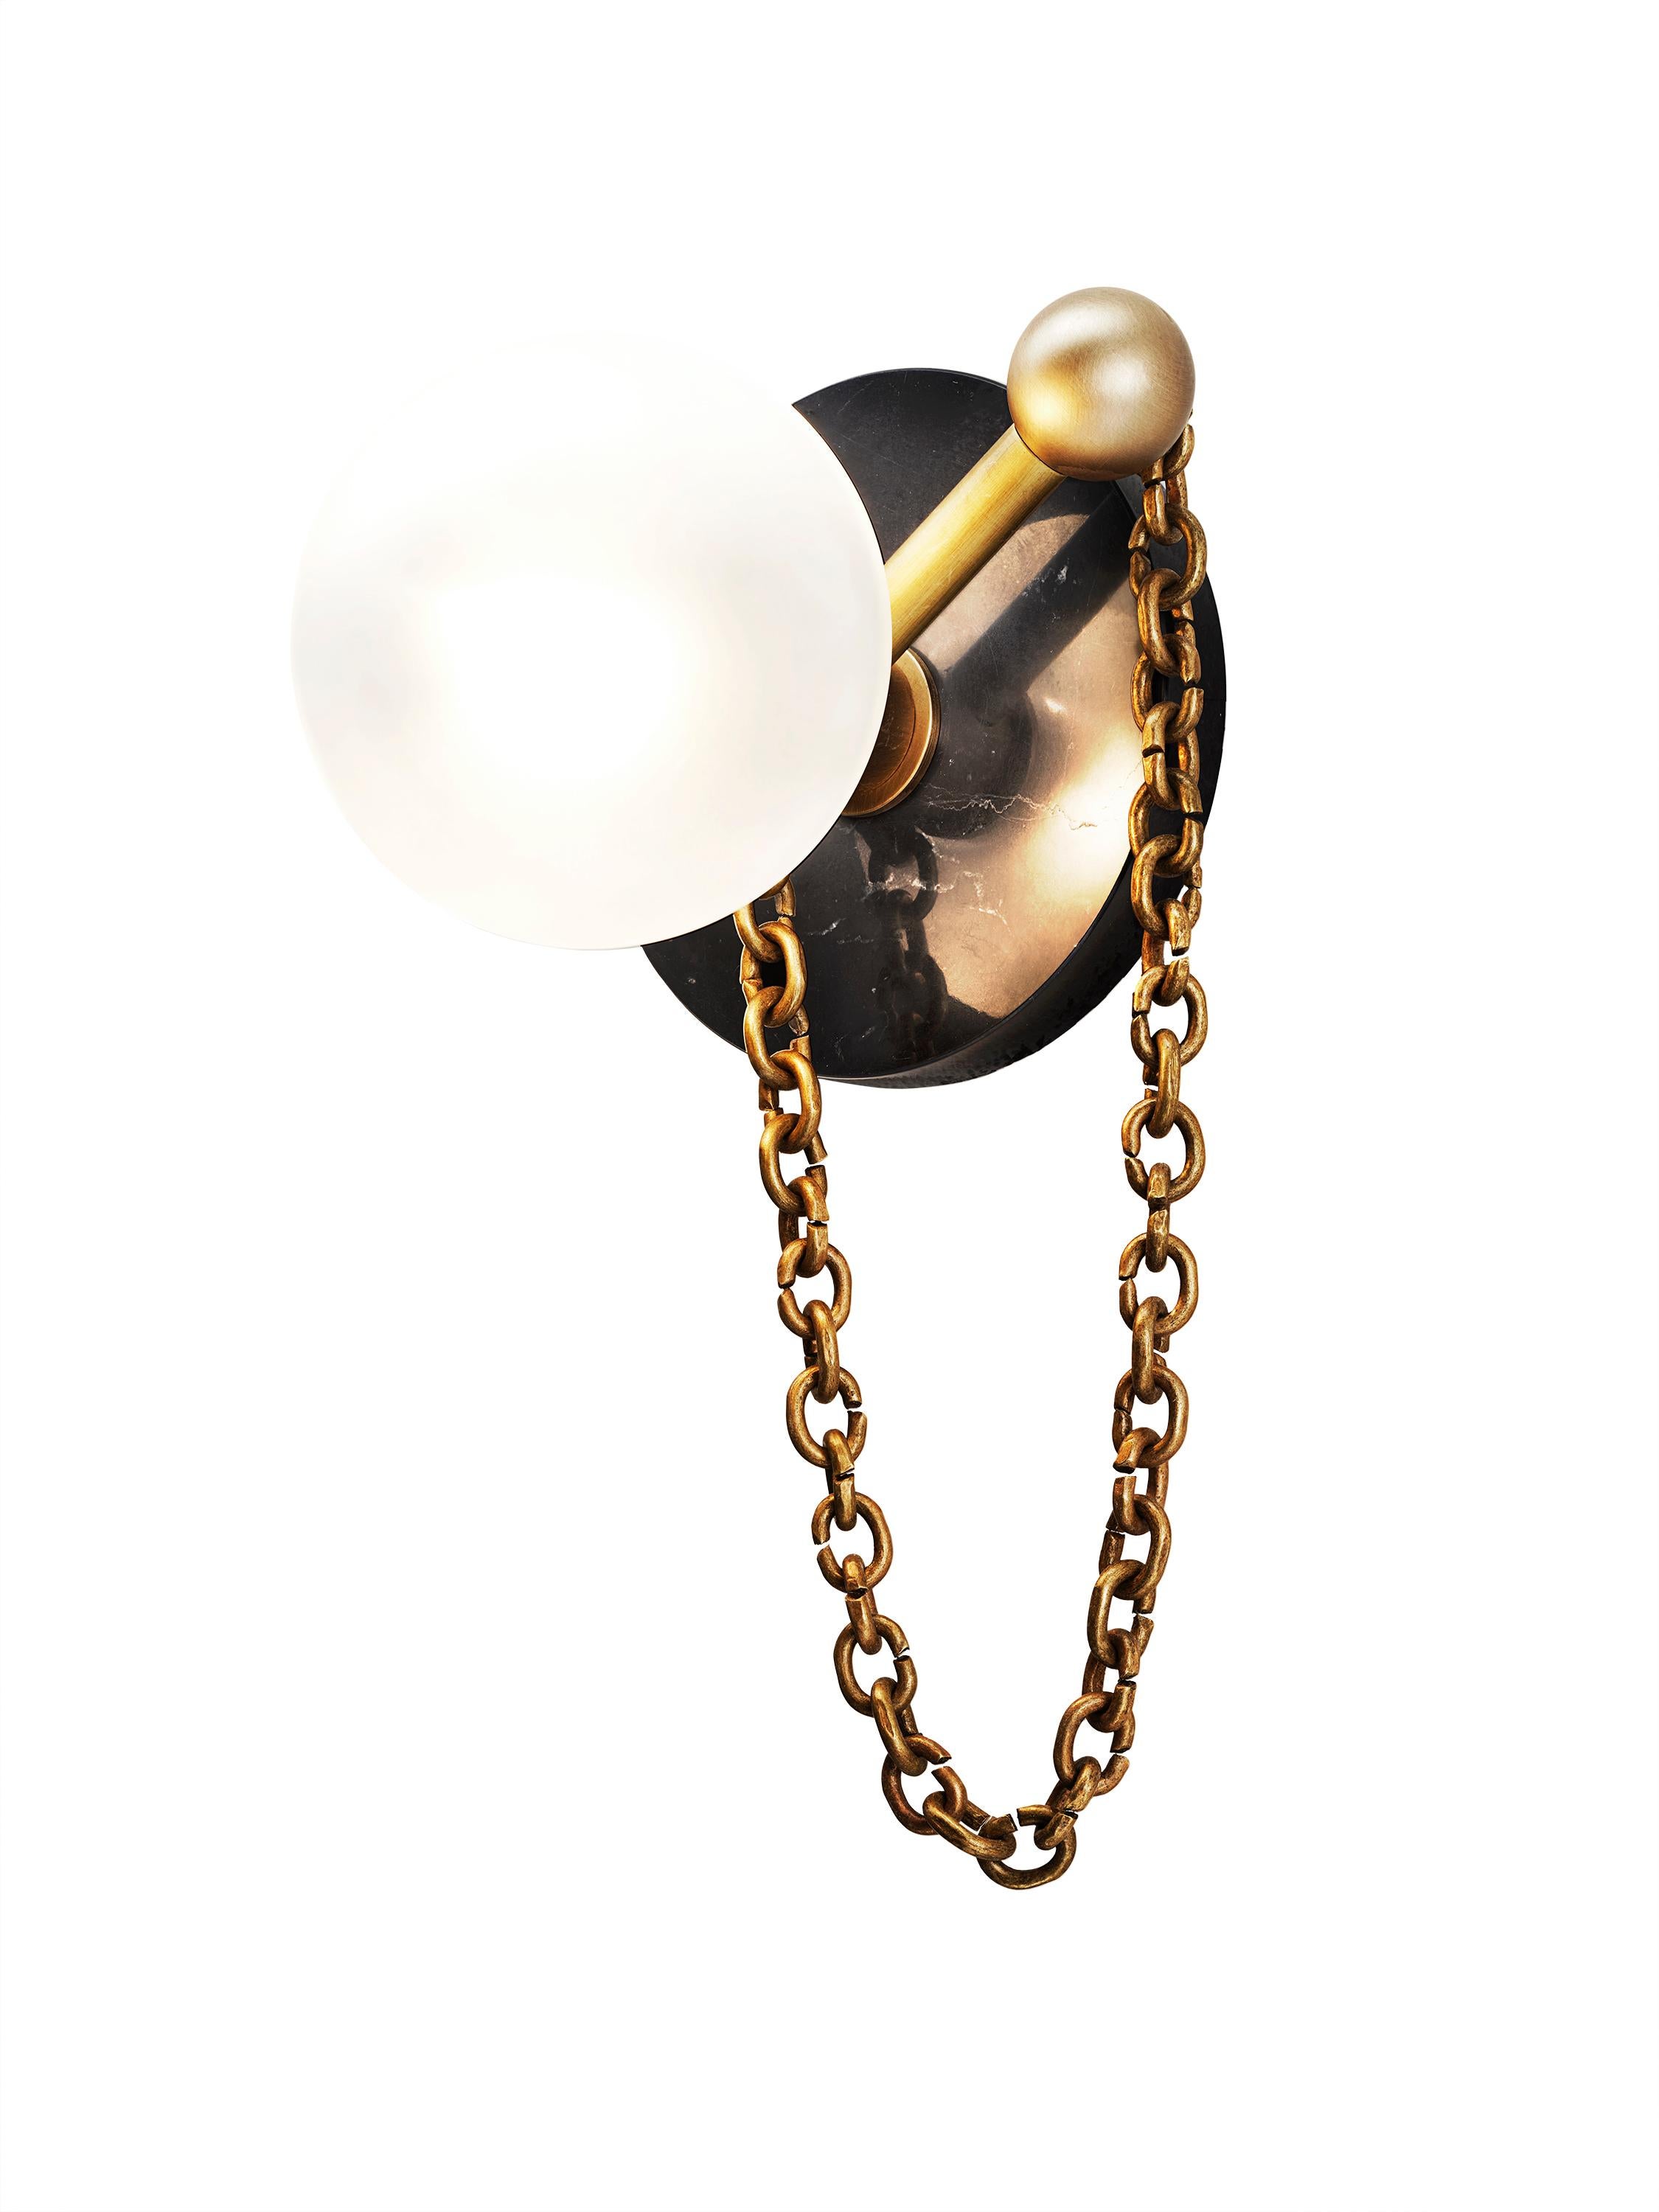 ALLA WALL SCONCE

Featuring a Marquina black marble backplate and delicate chain inspired by Christian Dior’s luxurious pearl earrings, the Alla Wall Sconce delivers a harmonious blend of simplicity and sophistication, brilliantly complementing any